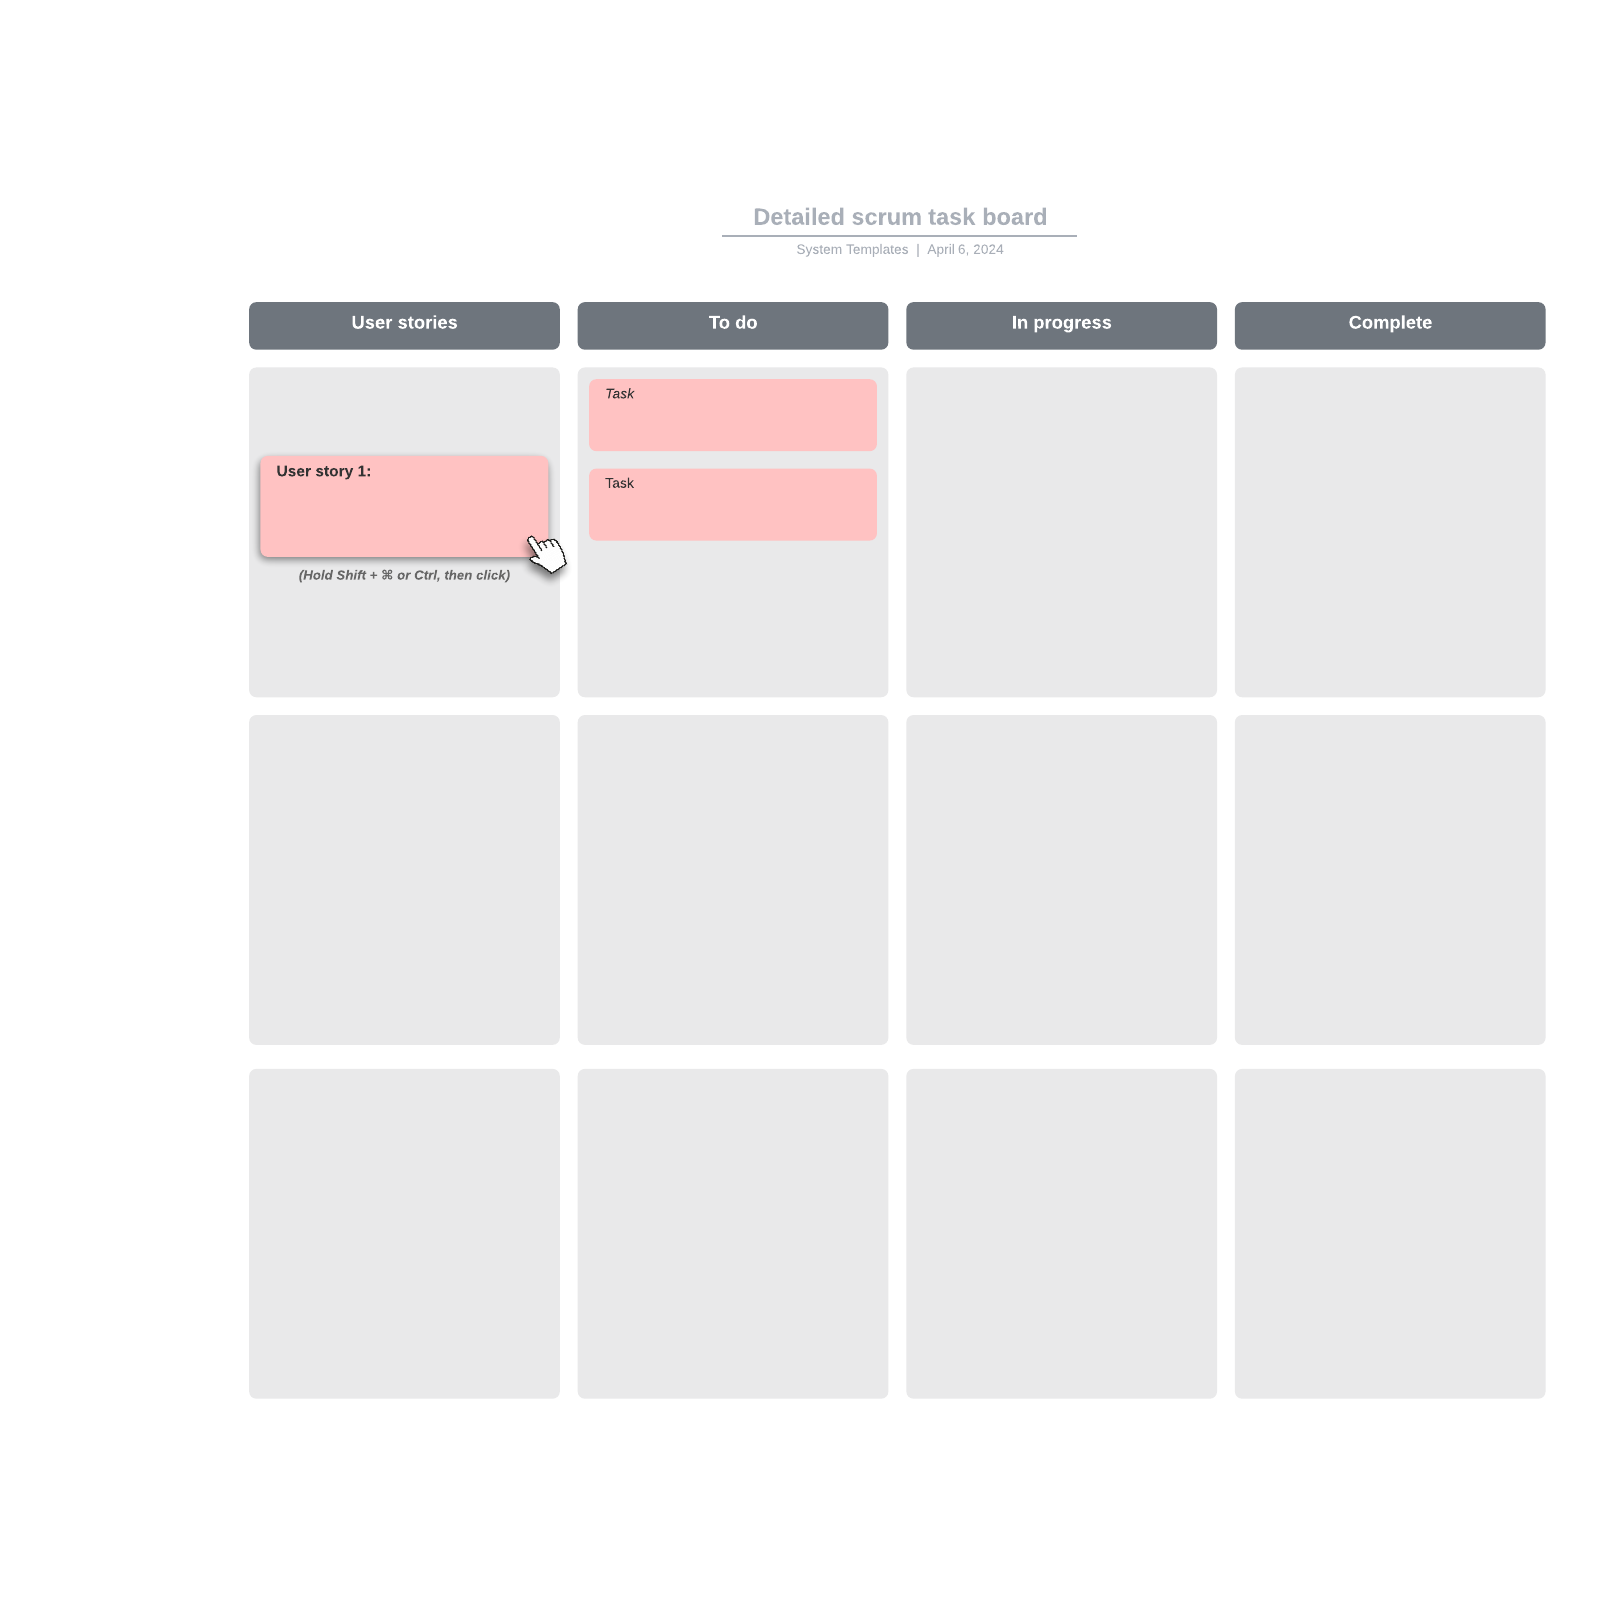 Detailed Scrum task board example